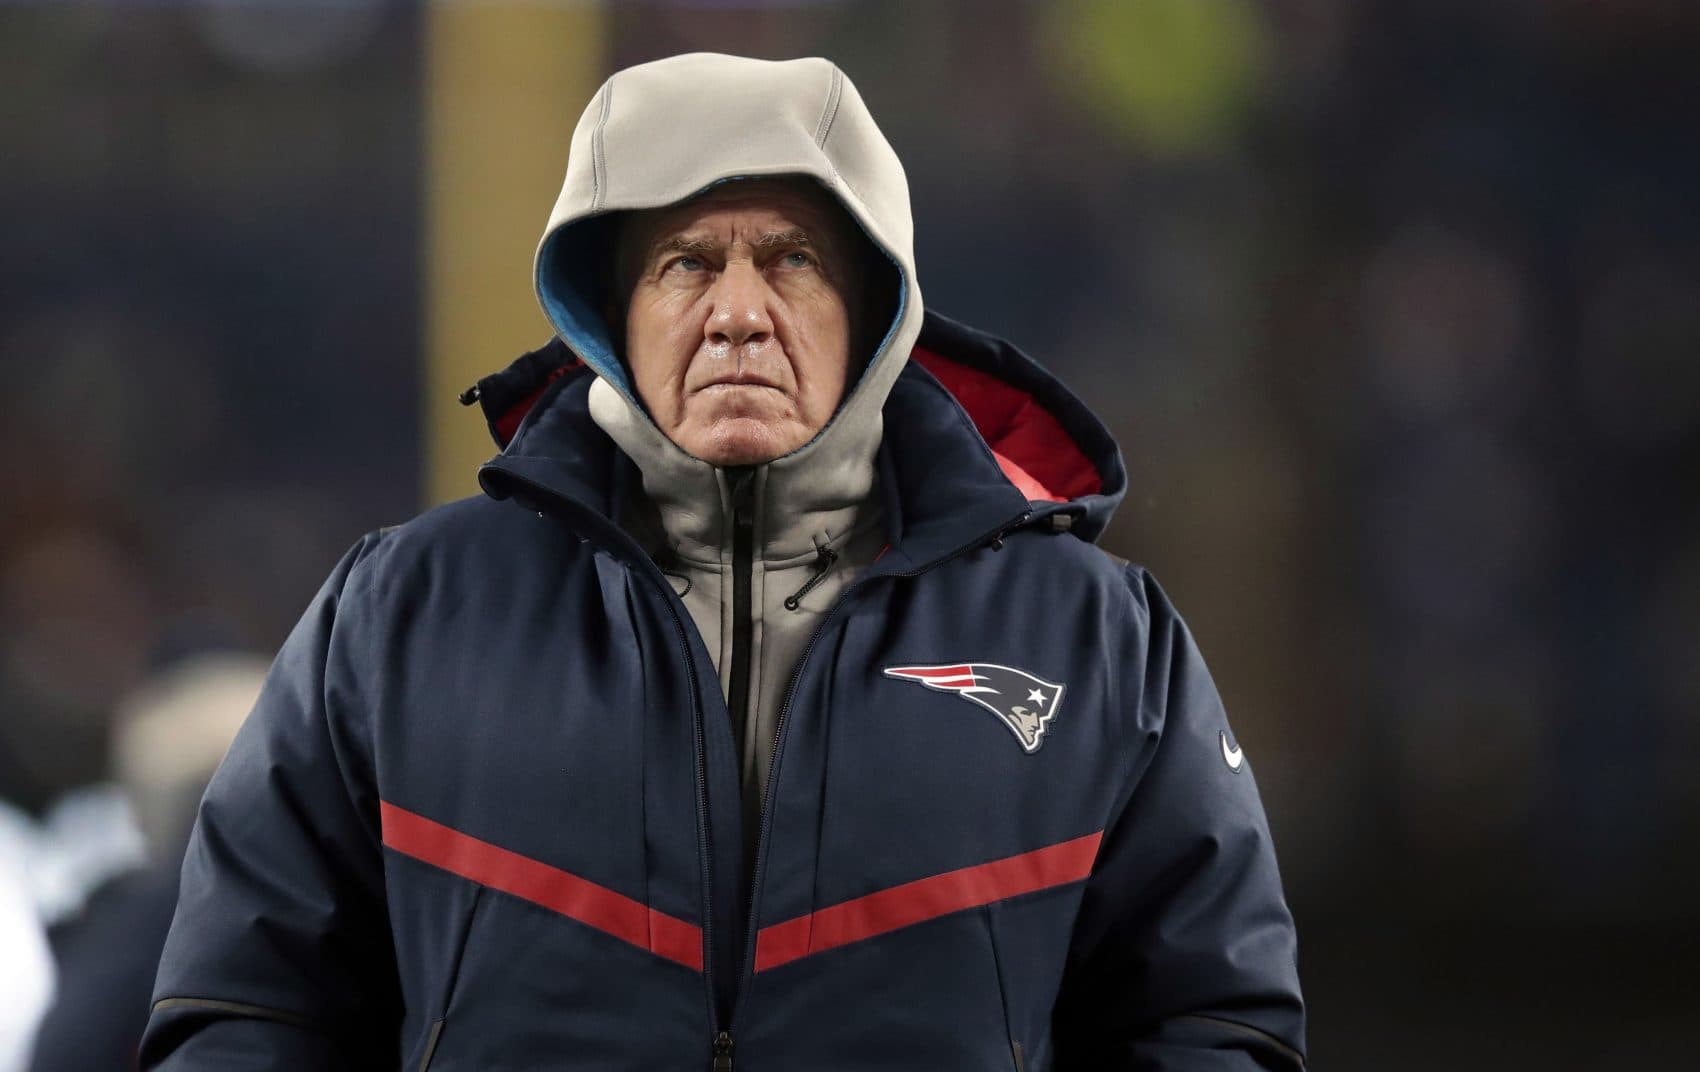 New England Patriots head coach Bill Belichick walks on the field before an NFL divisional playoff football game against the Tennessee Titans in Foxborough, Mass. (Charles Krupa/AP)